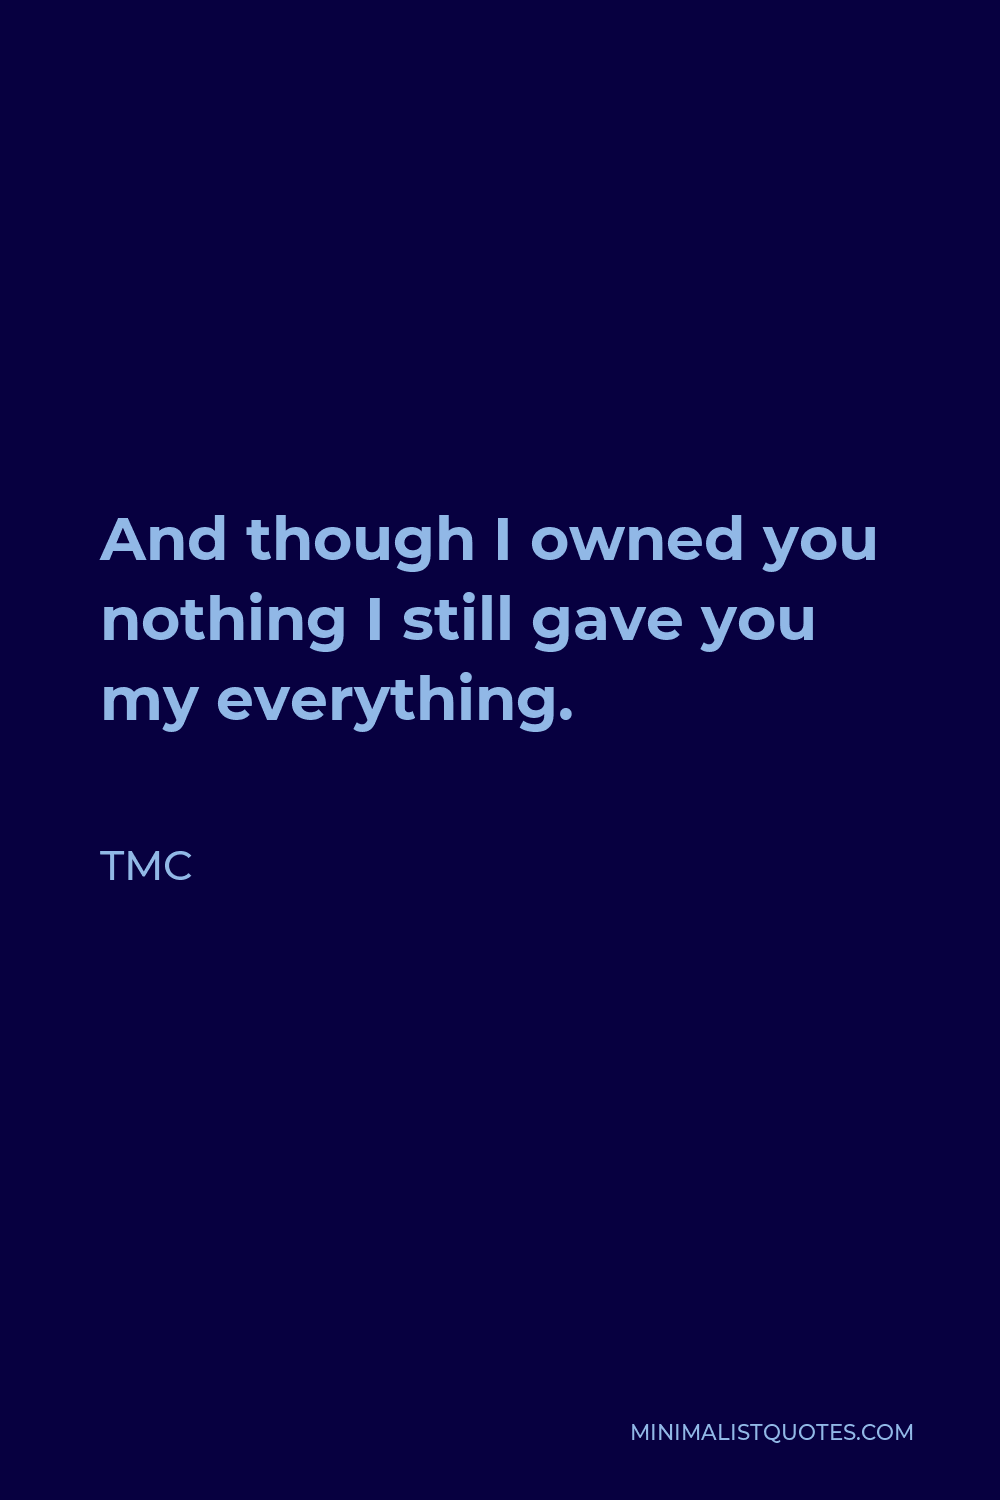 TMC Quote - And though I owned you nothing I still gave you my everything.